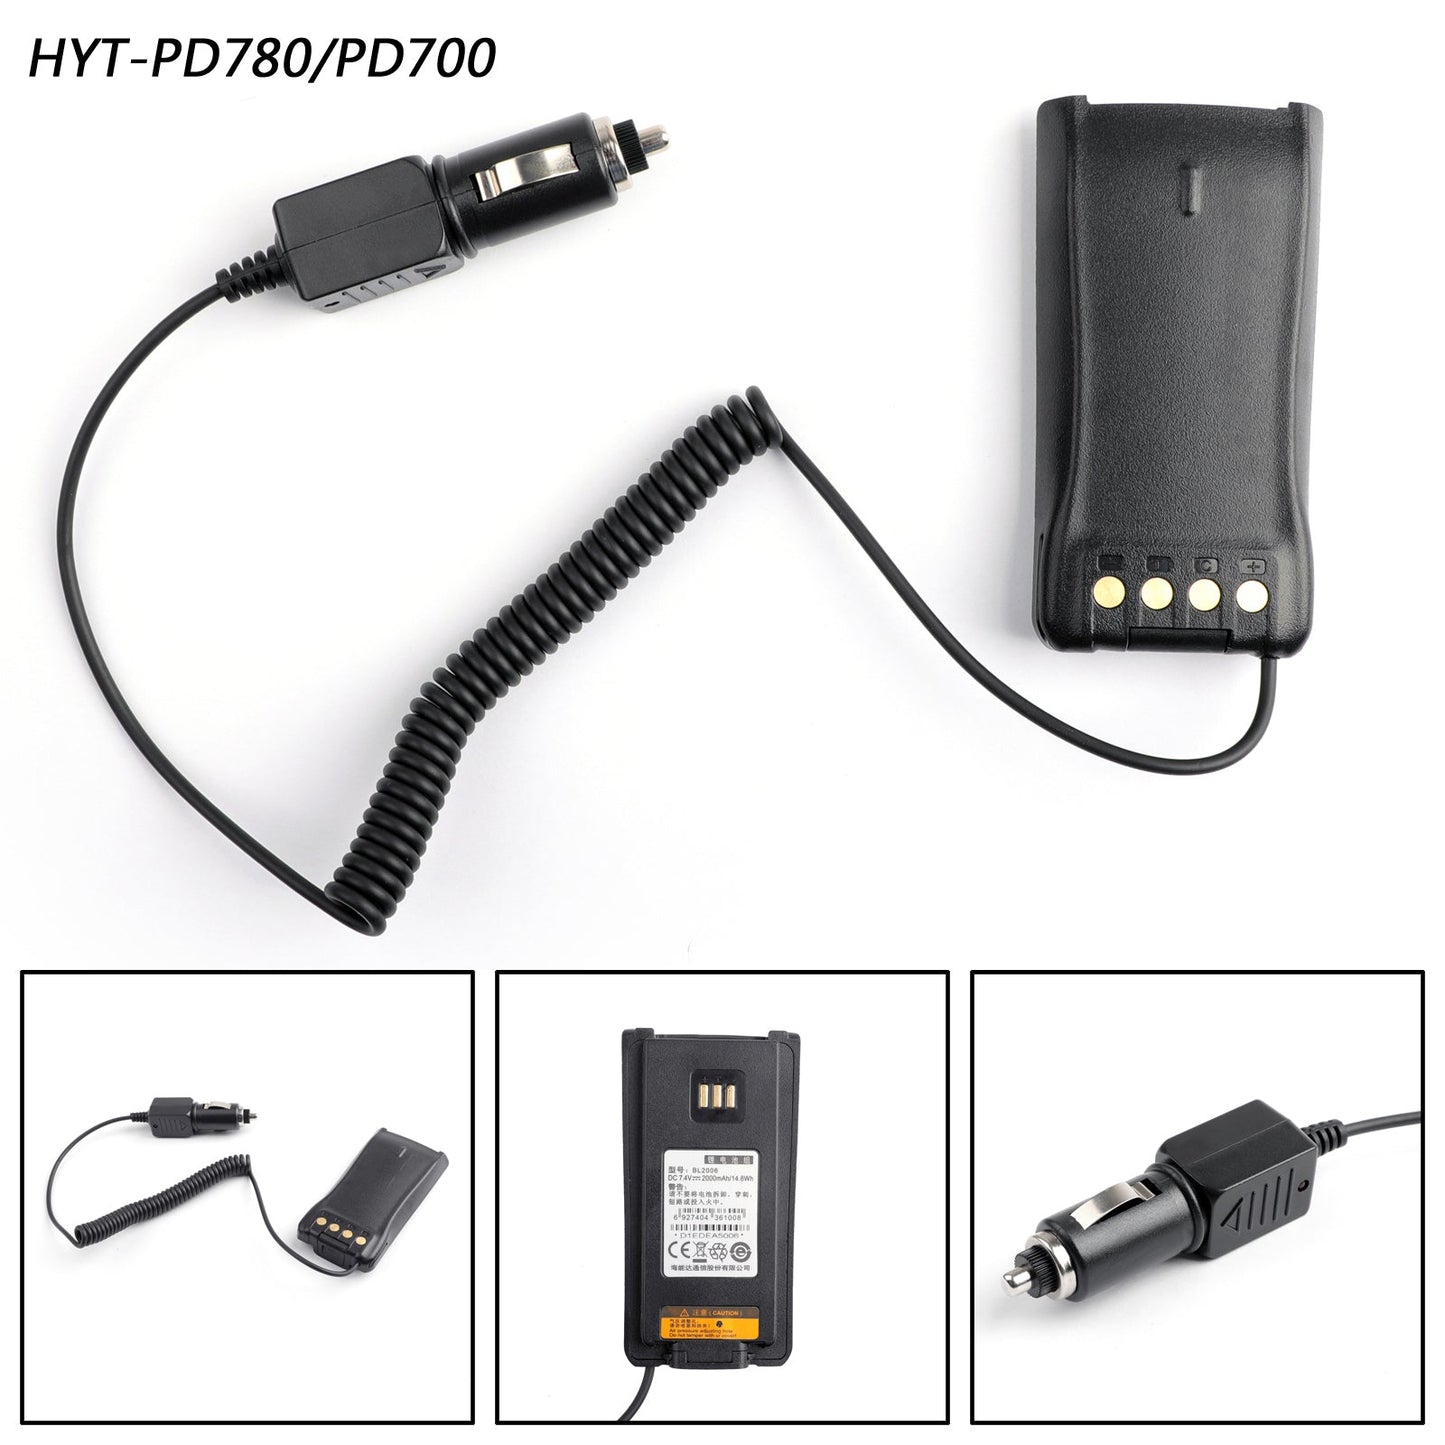 Car Battery Eliminator Accessories For Hytera PD780 PD700 Radio Walkie Talkie